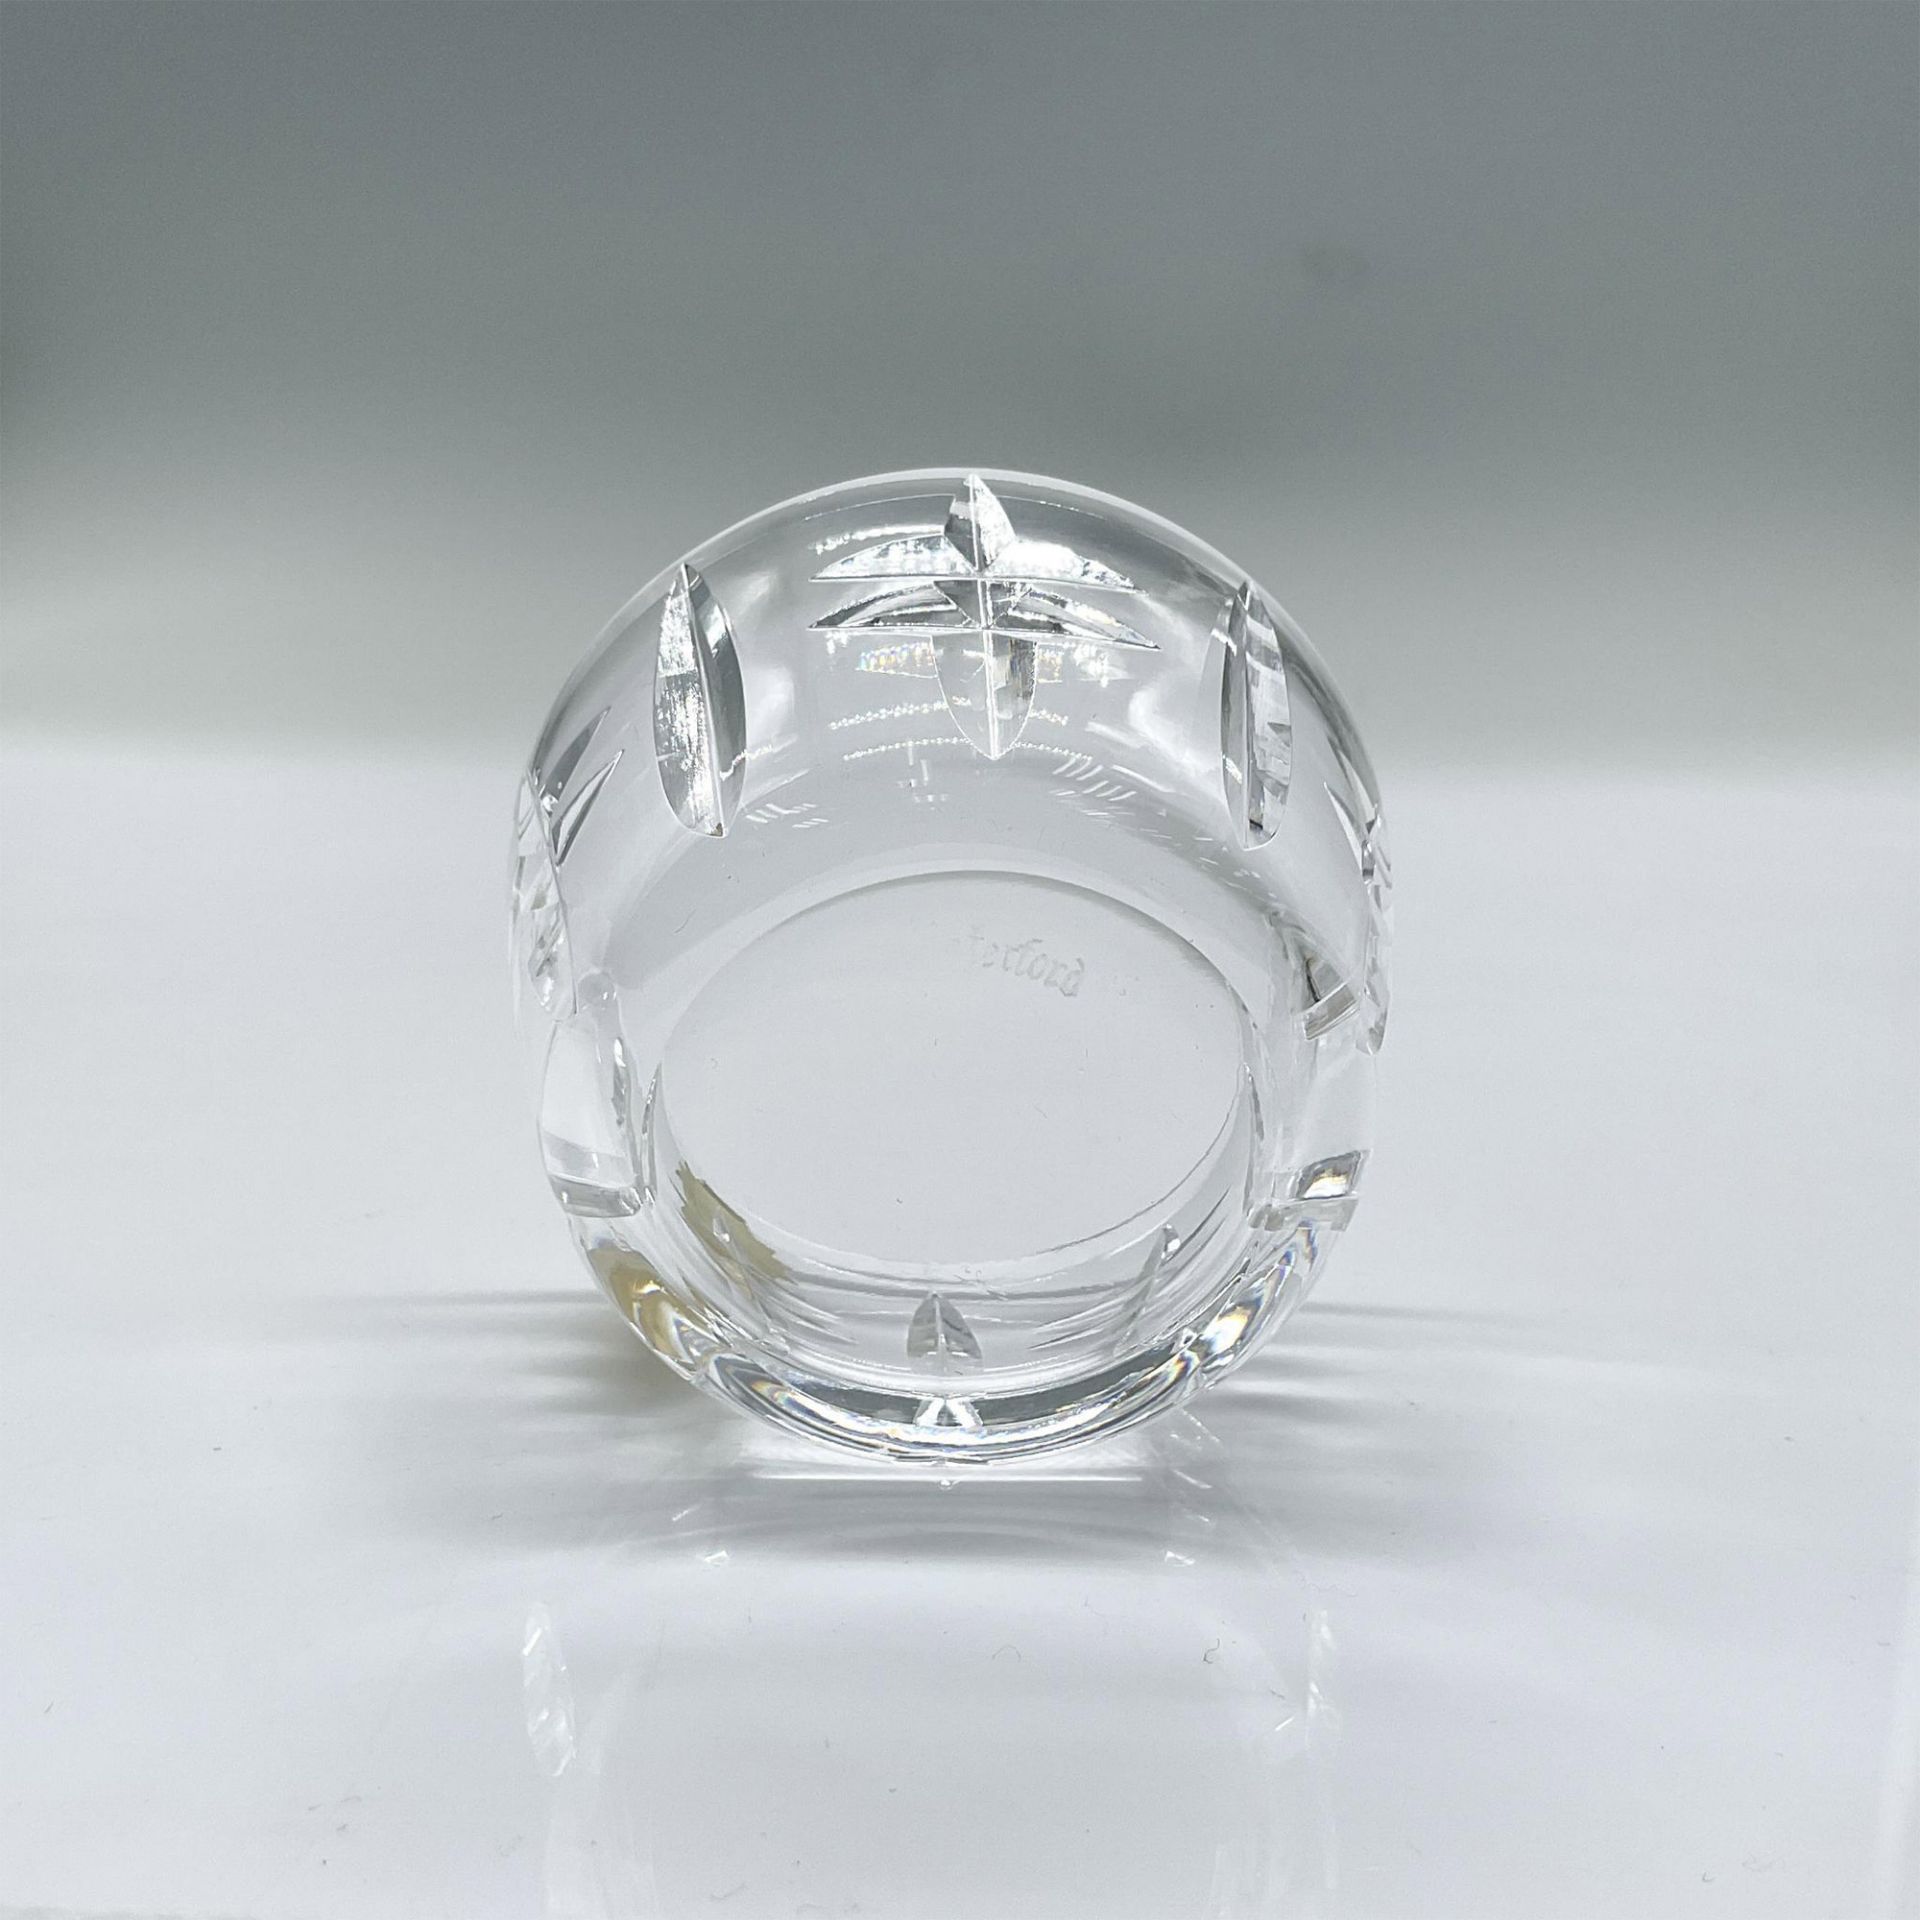 Waterford Crystal Small Dish - Image 3 of 3